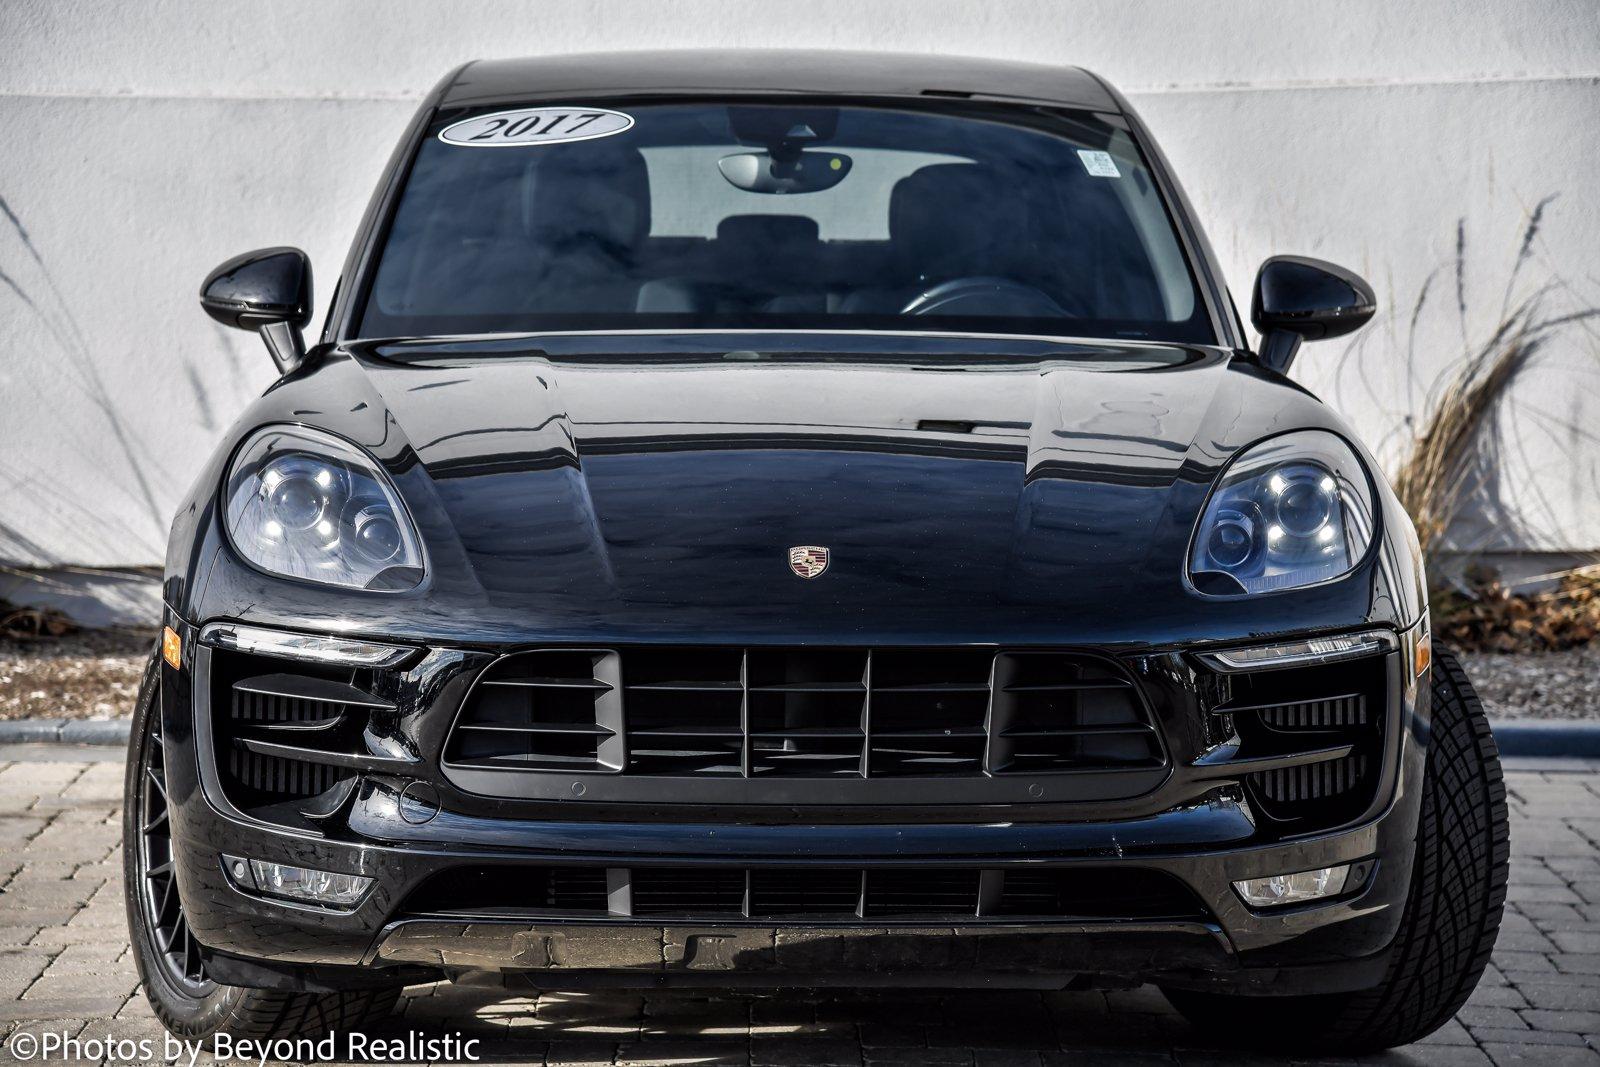 Used 2017 Porsche Macan GTS | Downers Grove, IL